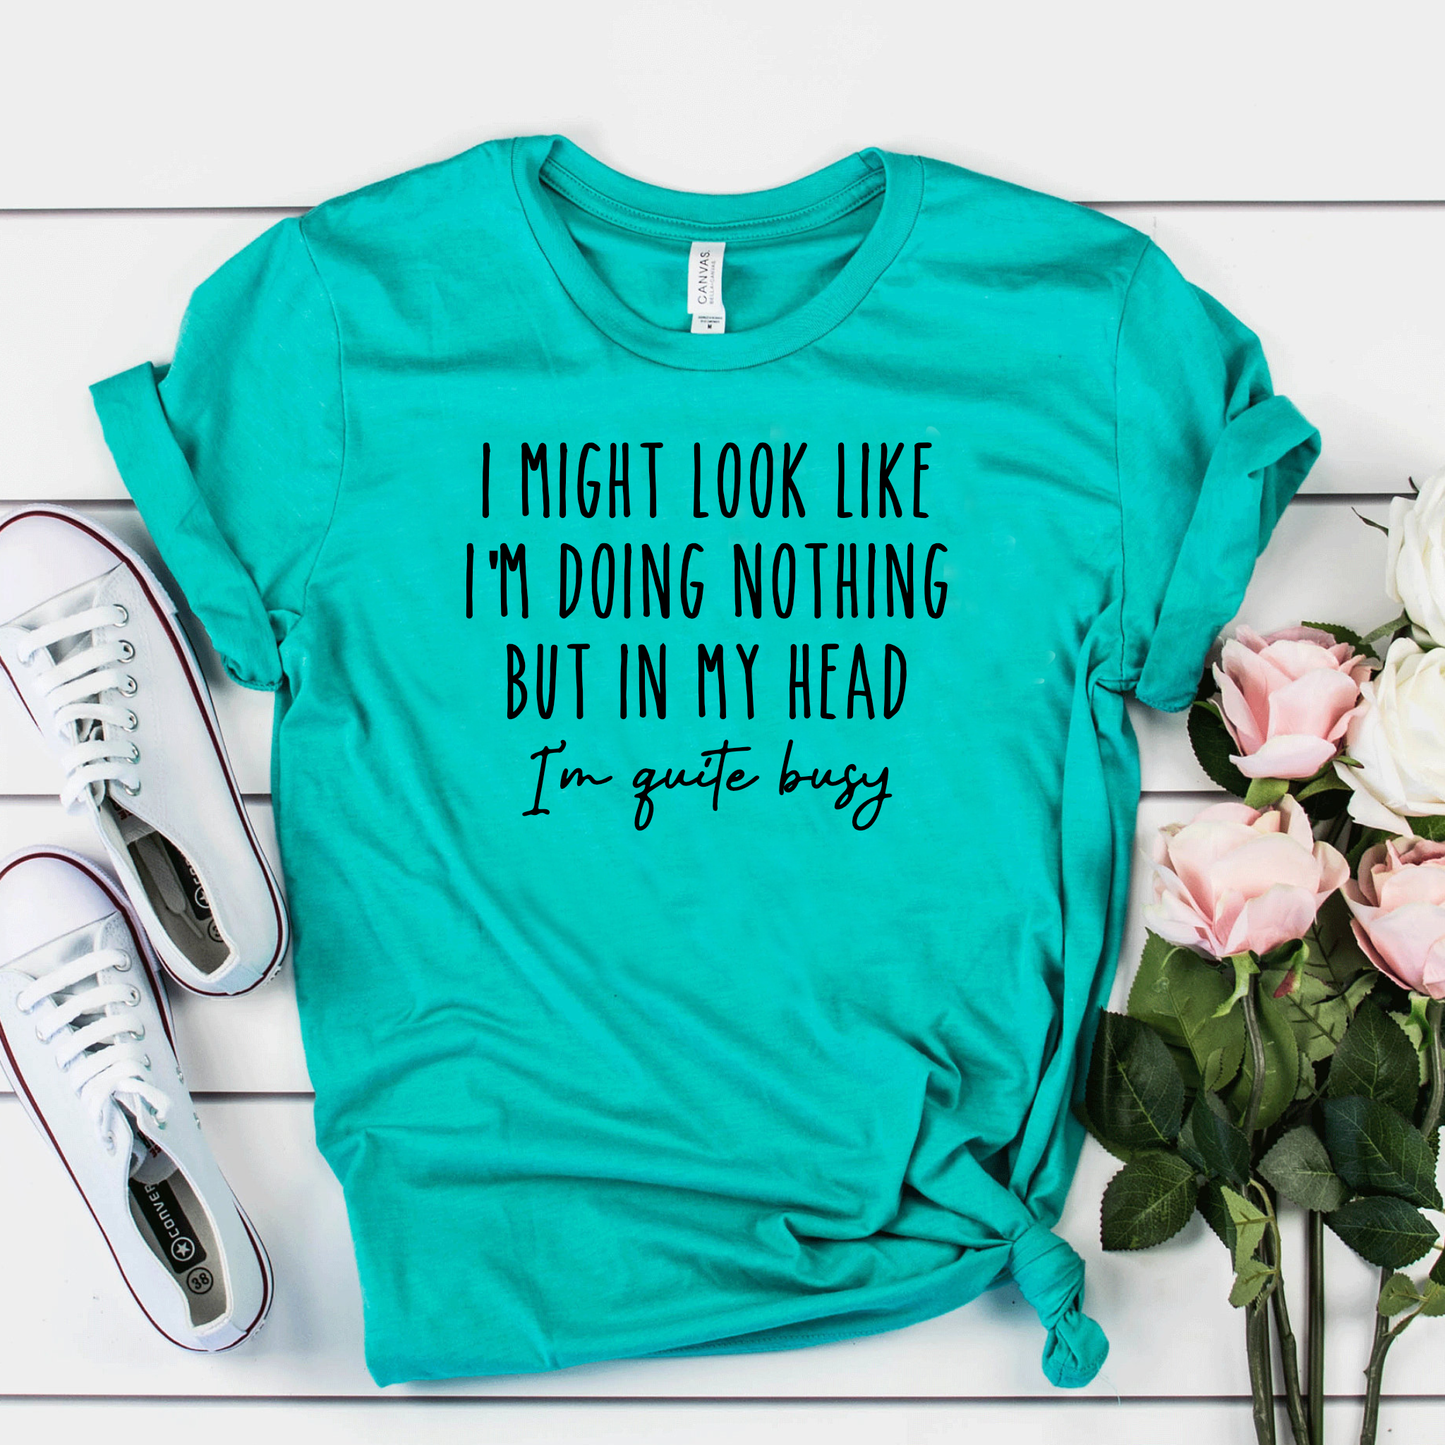 I Might Look like I'm Doing Nothing, But in my Head I'm Quite Busy -  Funny Tee